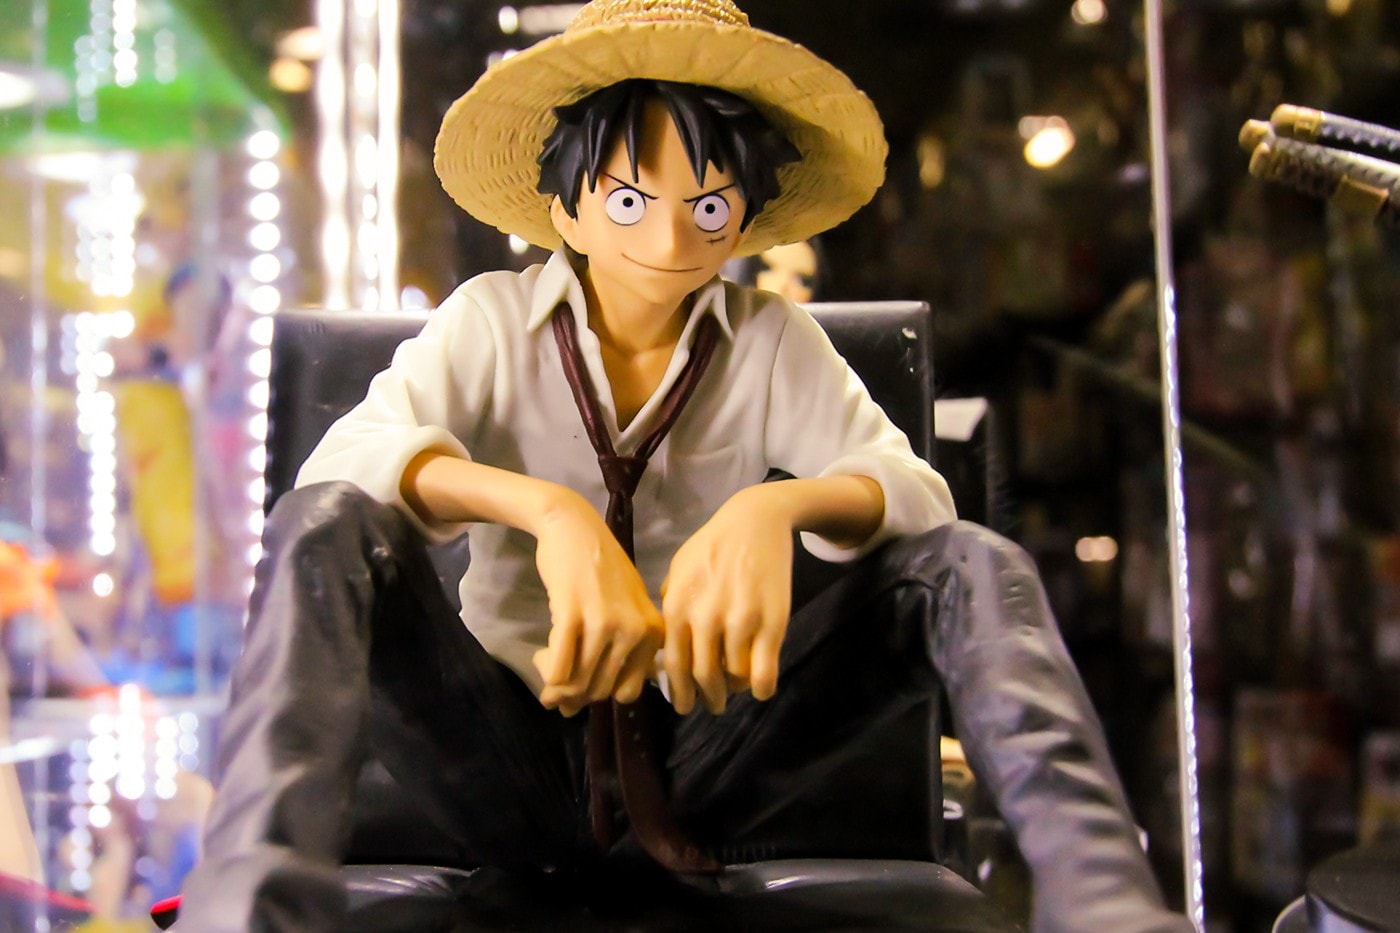 New One Piece Movie Could be Announced After Episode 1000 - Anime Corner